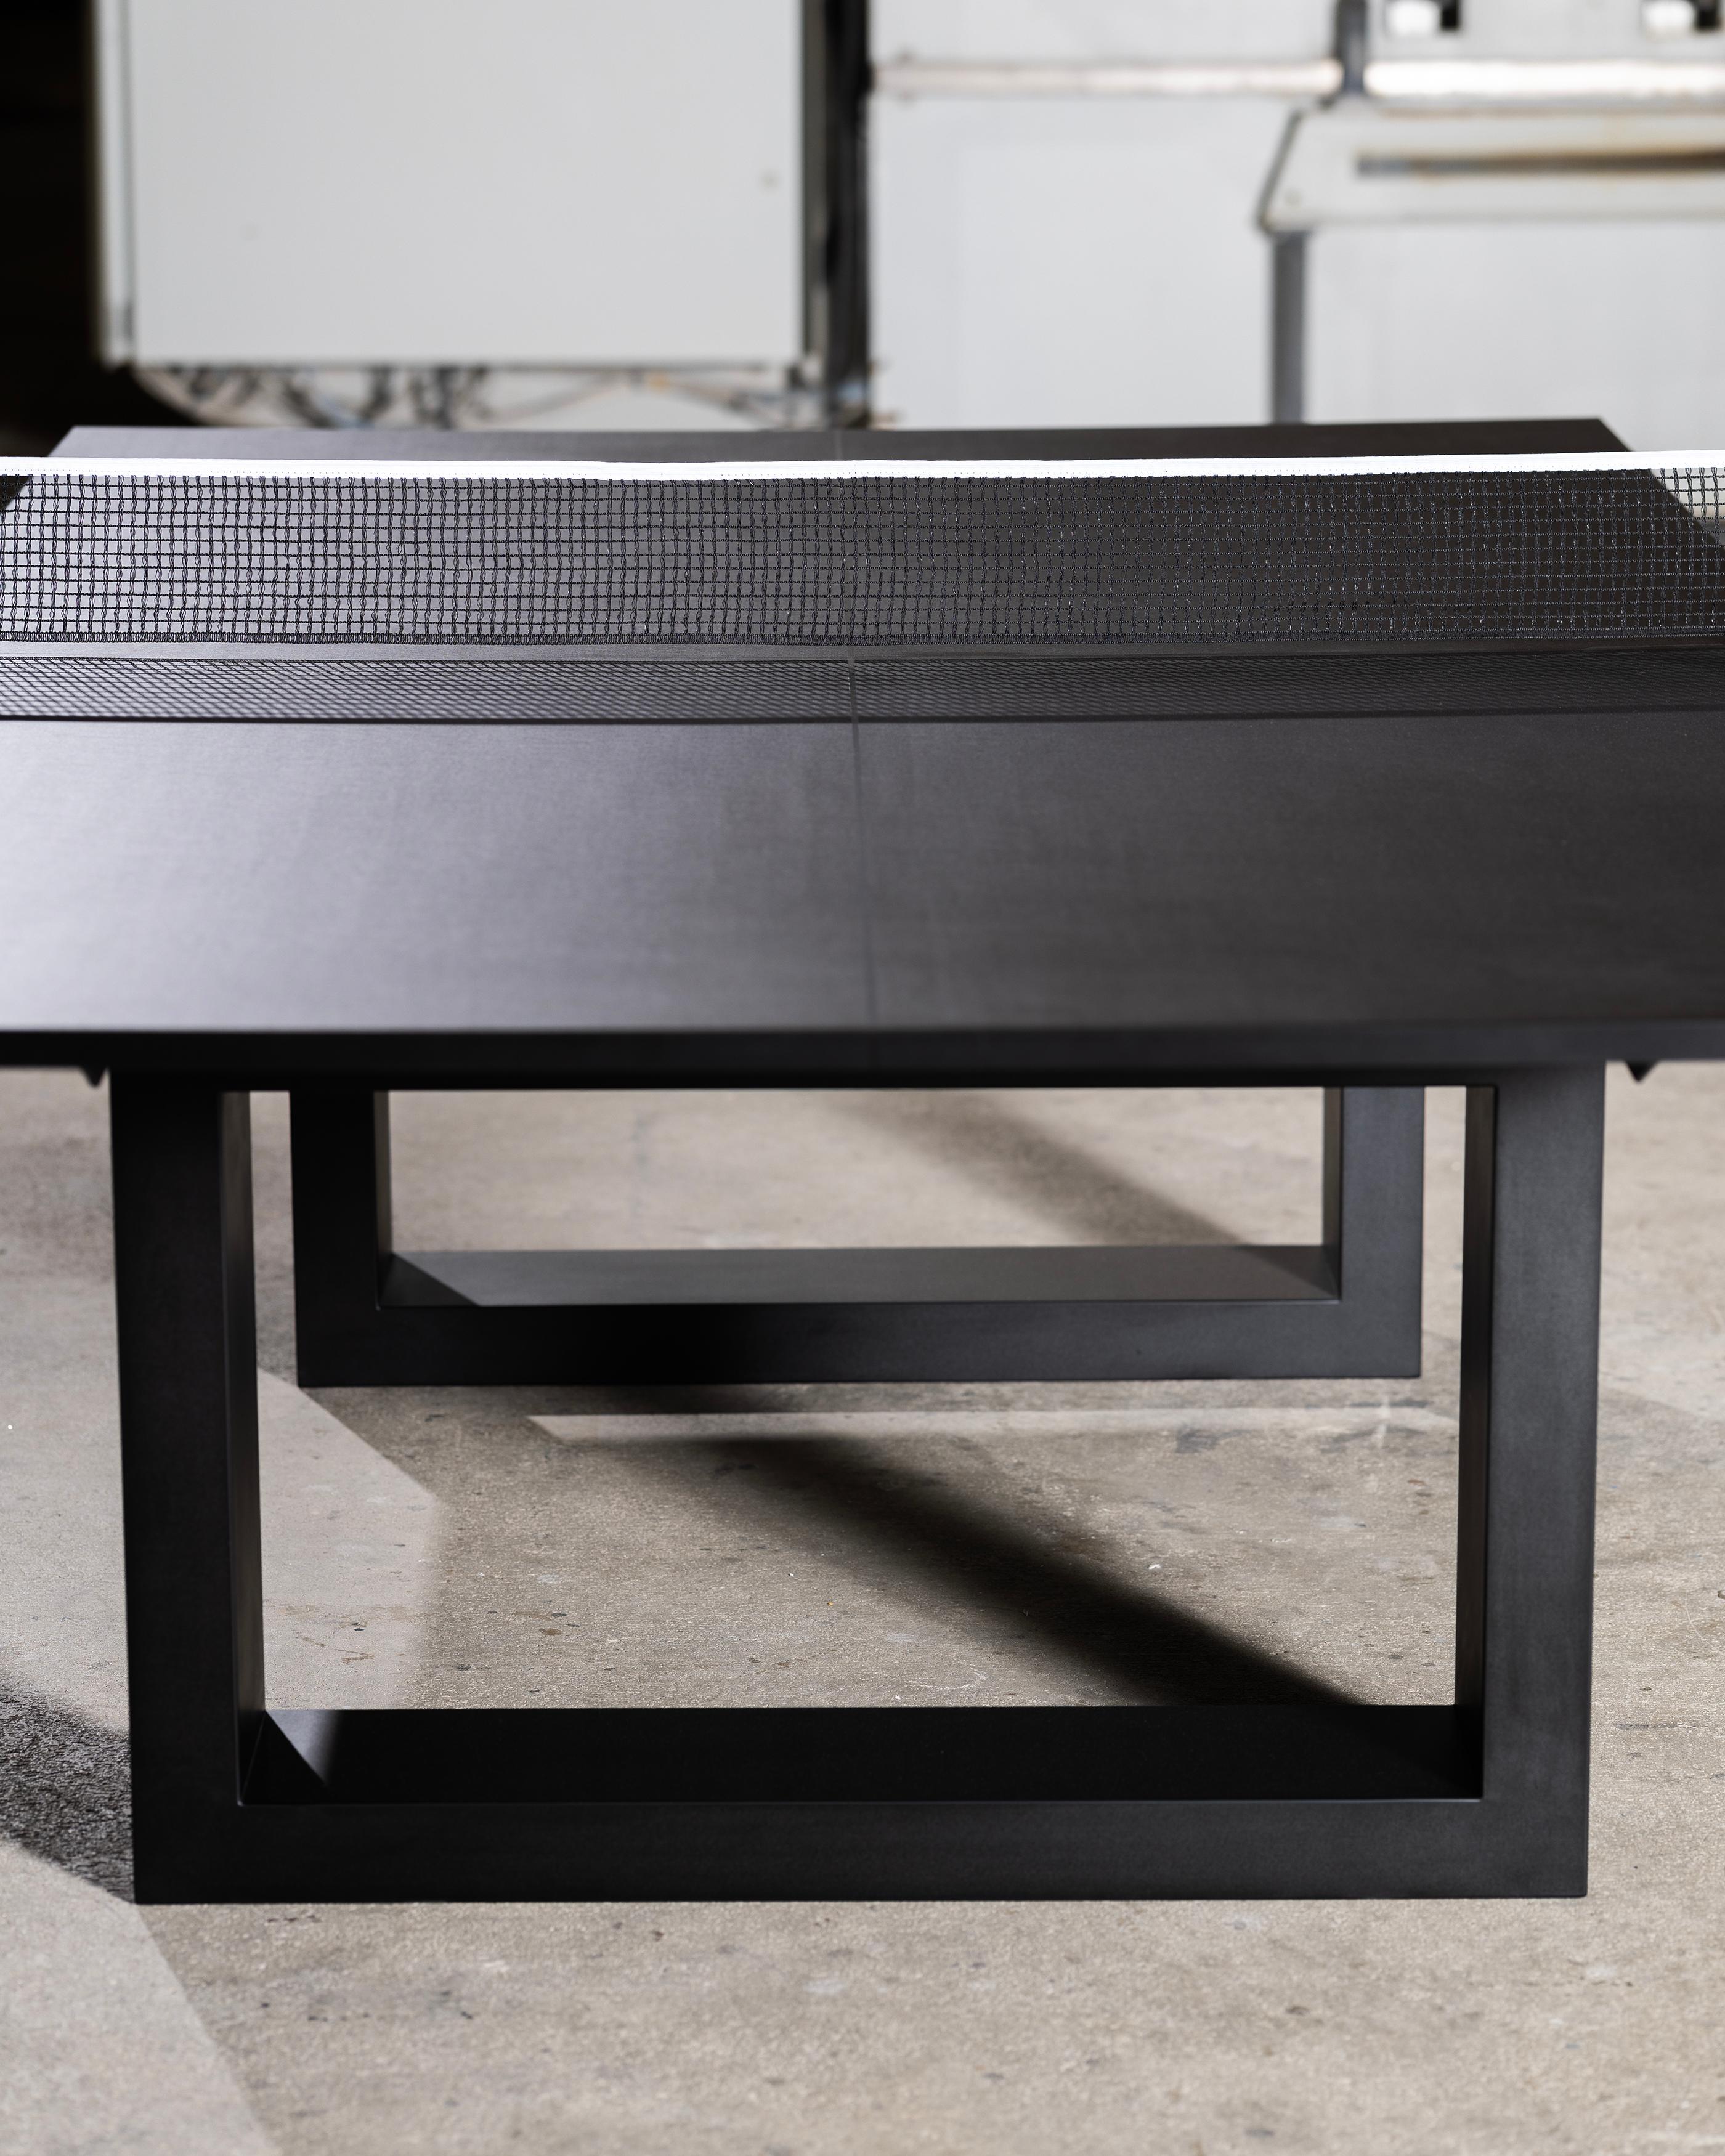 Contemporary James de Wulf Recycled Jet Black Ping Pong Table